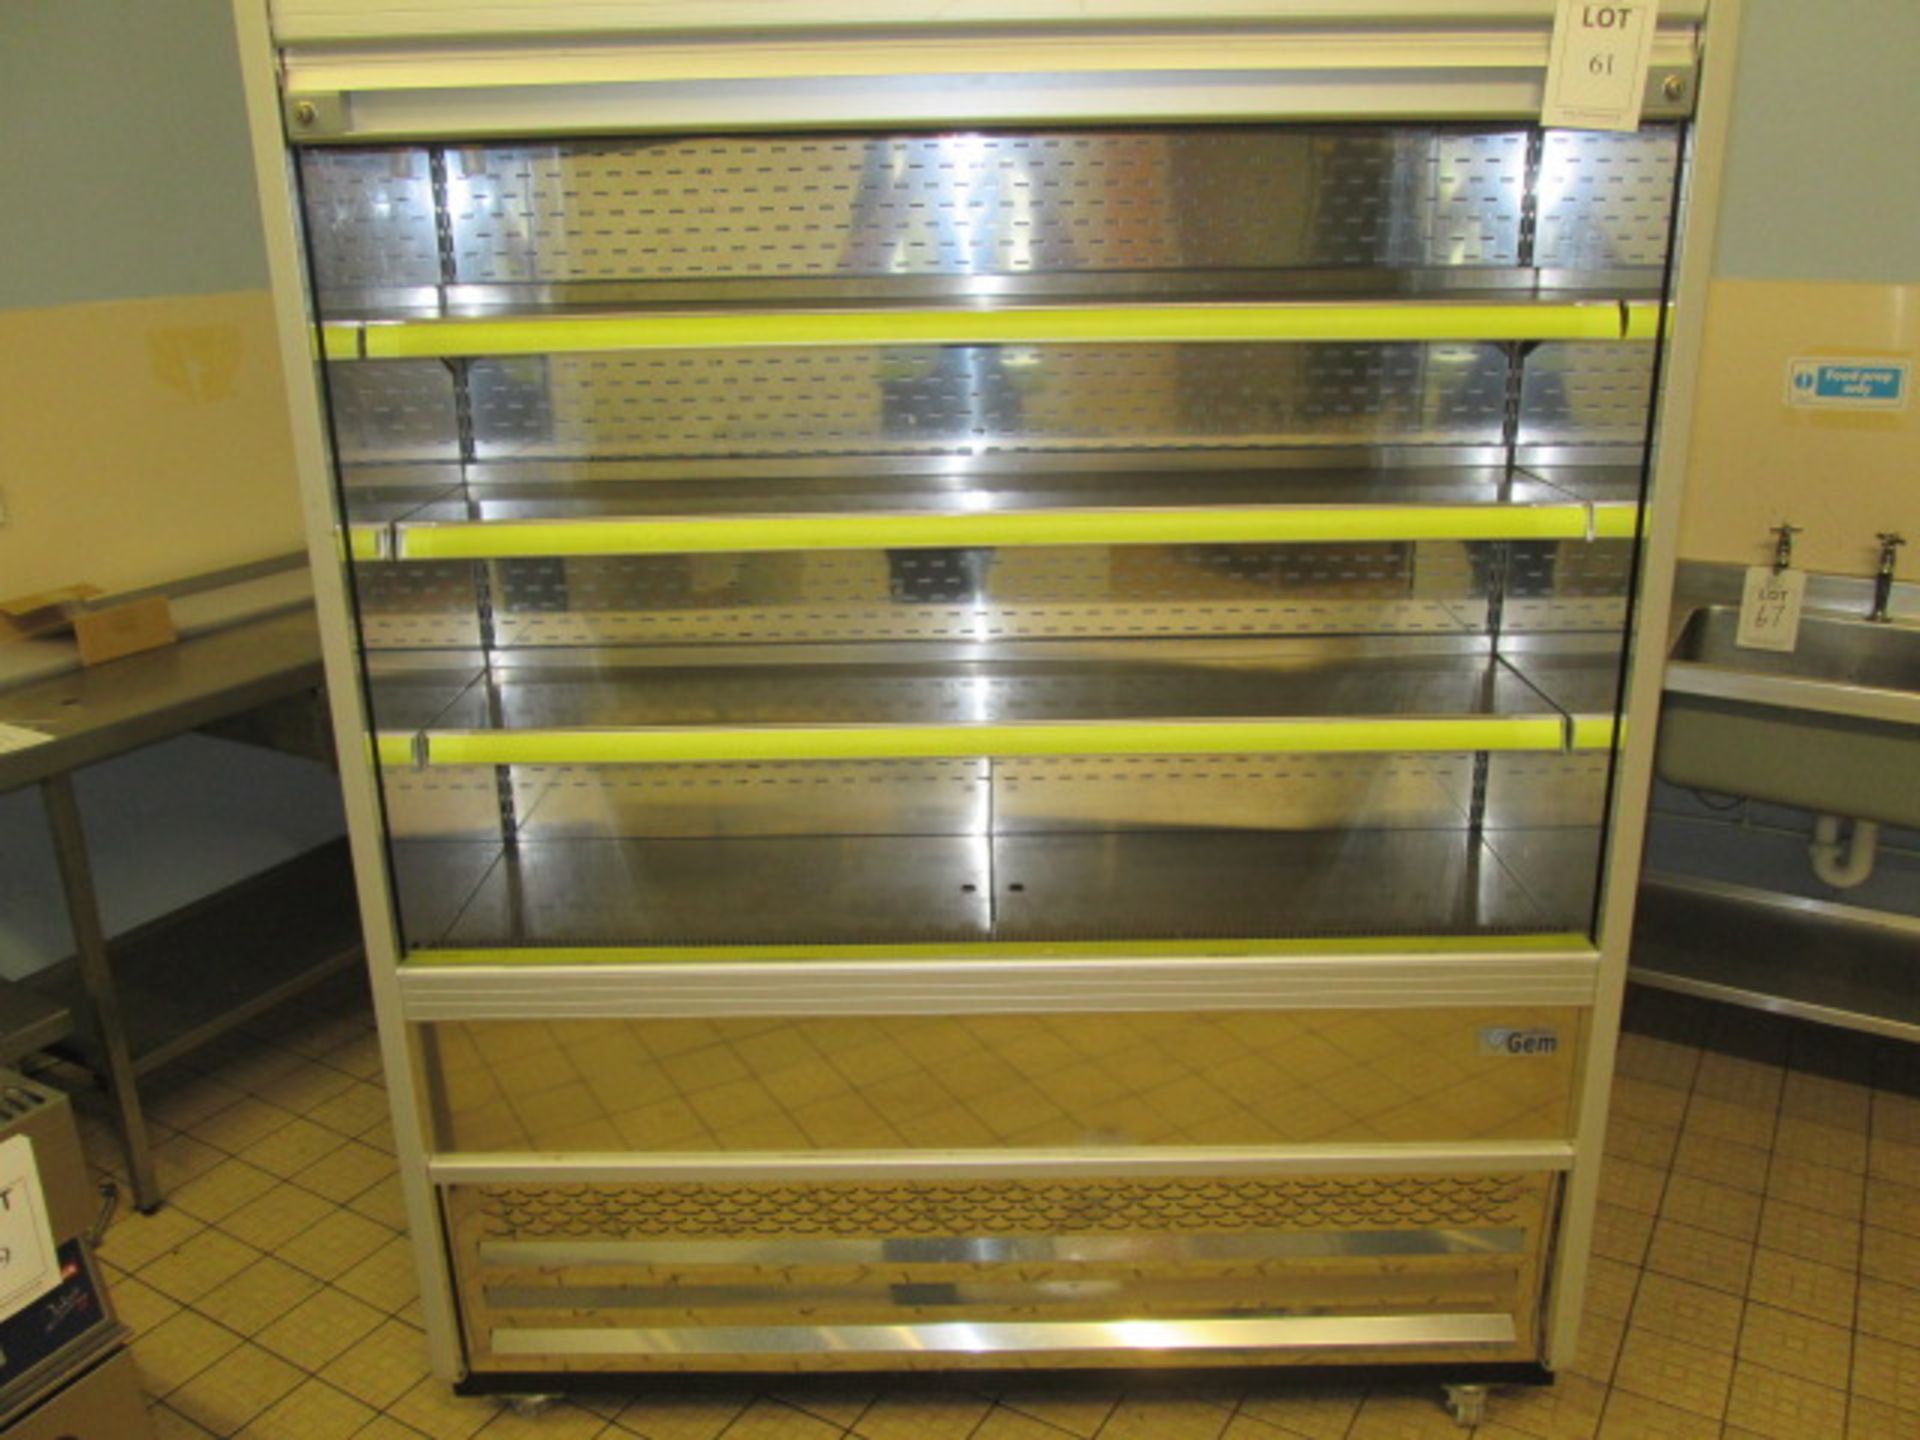 Williams GEM Model C150 s.c.s. roller fronted refrigerated display cabinet, s/n 091290 - Image 5 of 5